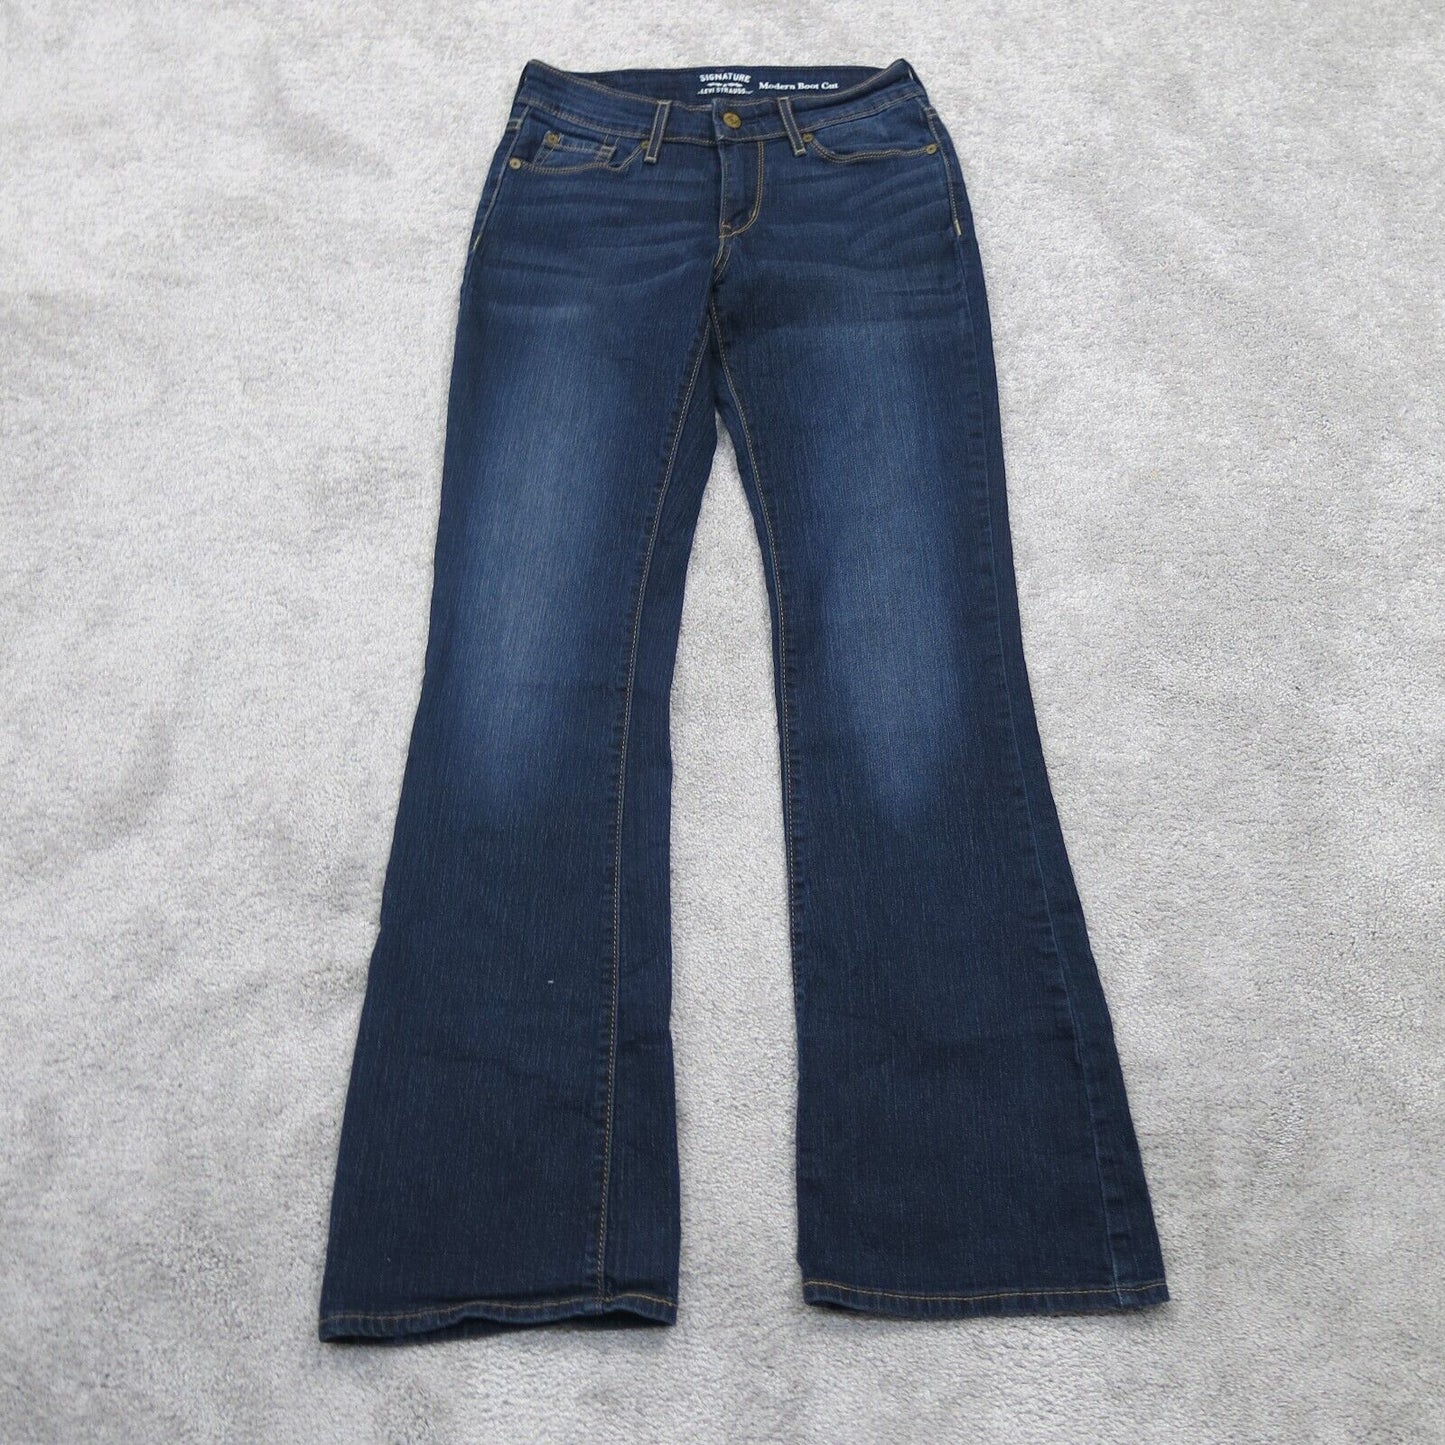 Signature by Levis Womens Modern Boot Cut Jeans Mid Rise Flat Front Blue W26xL32